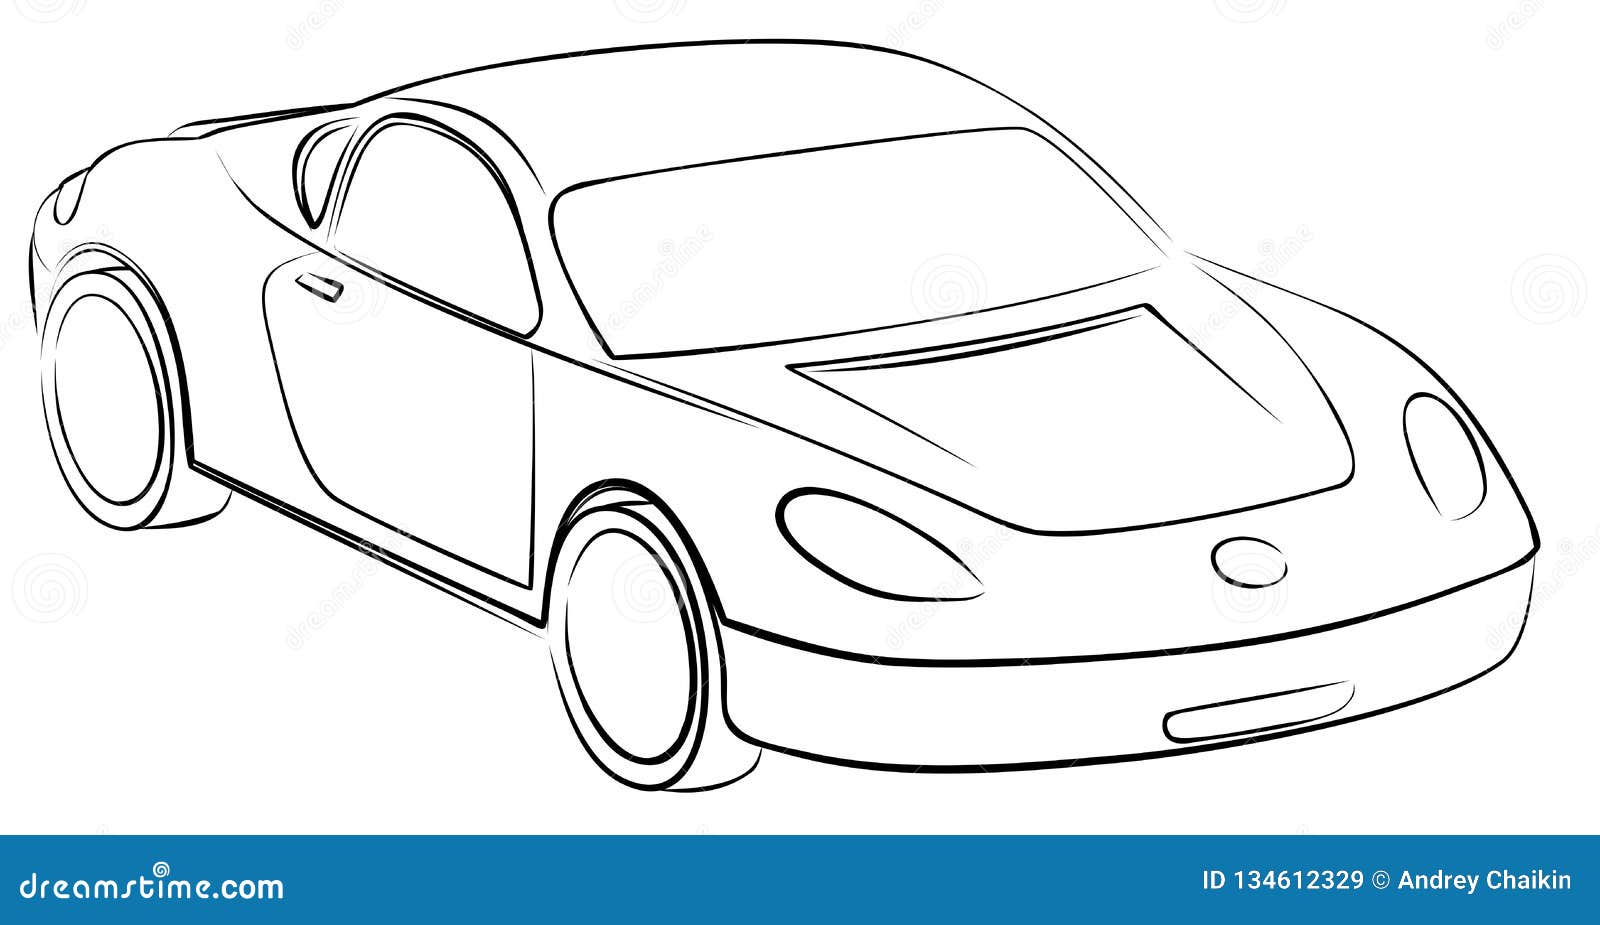 Sketch of the toy car. stock vector. Illustration of transport ...